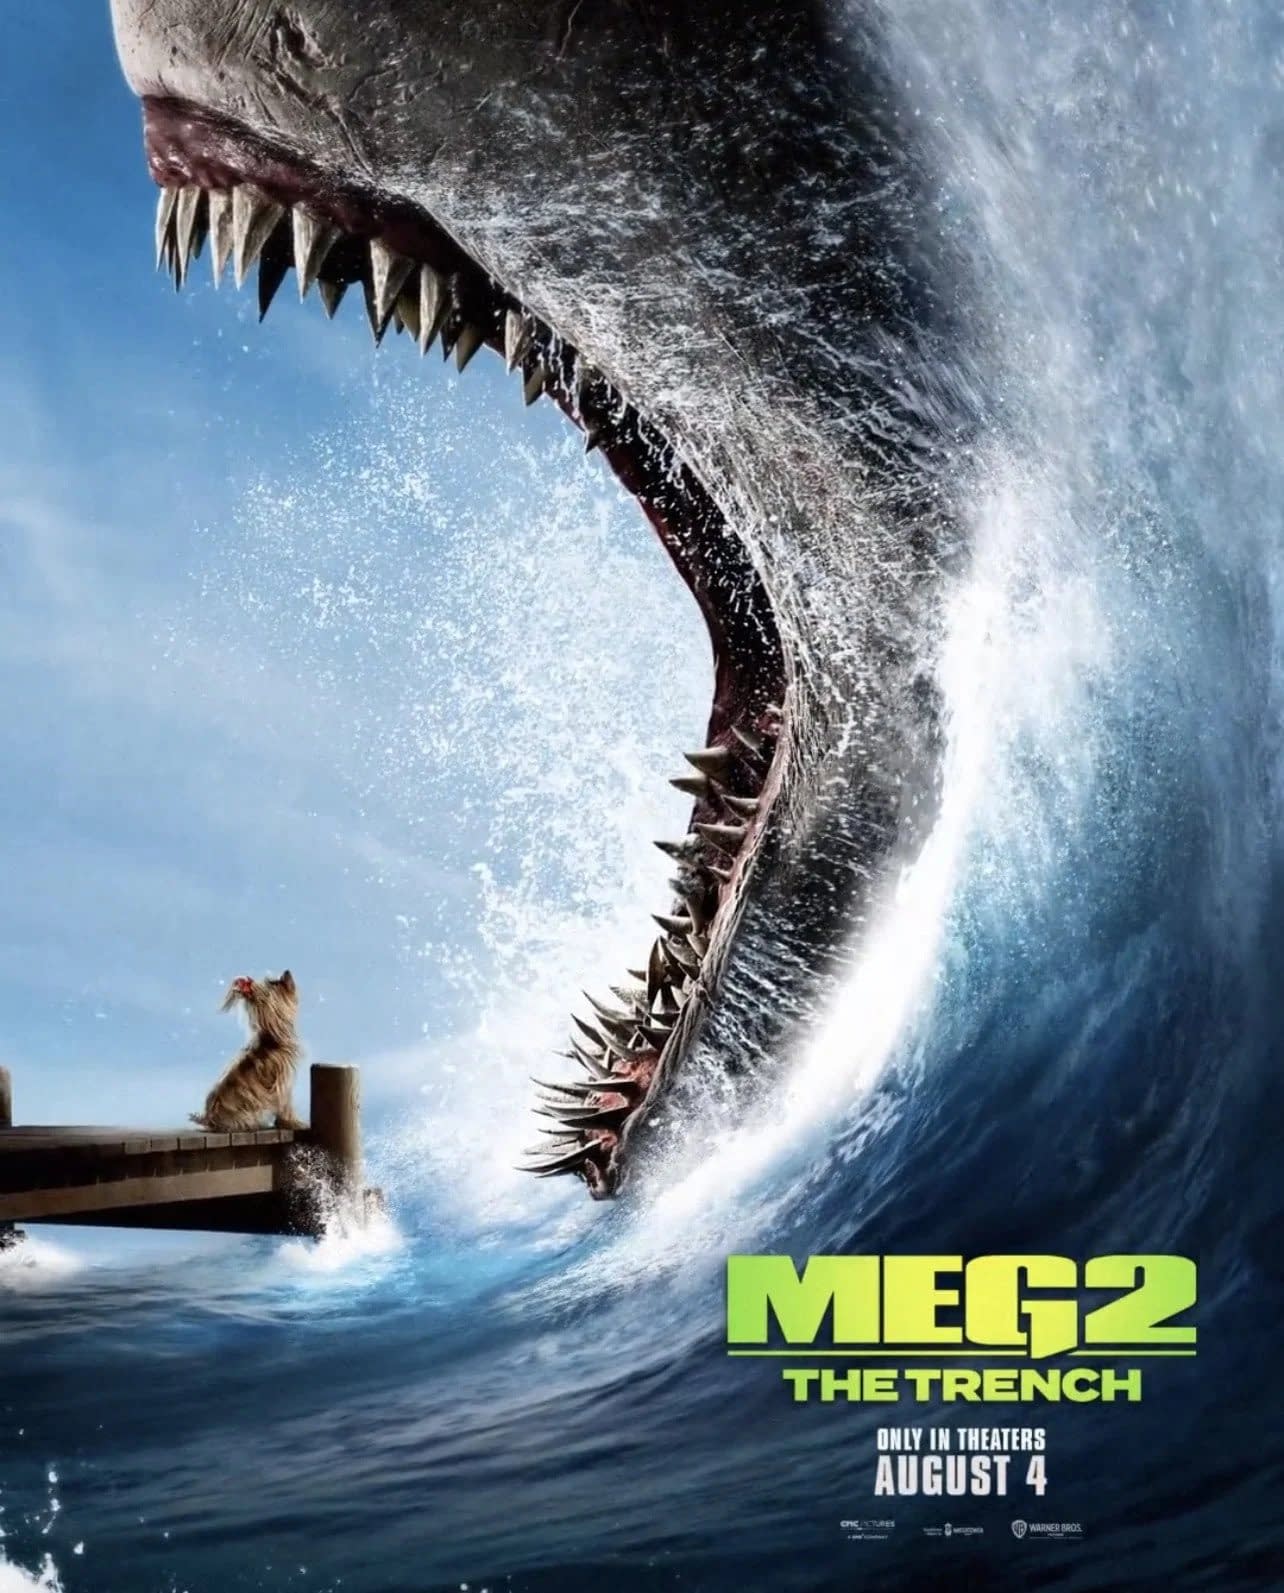 The Meg 2 Trailer Debuts TRex, Heart, & 3 Megs For Statham To Punch